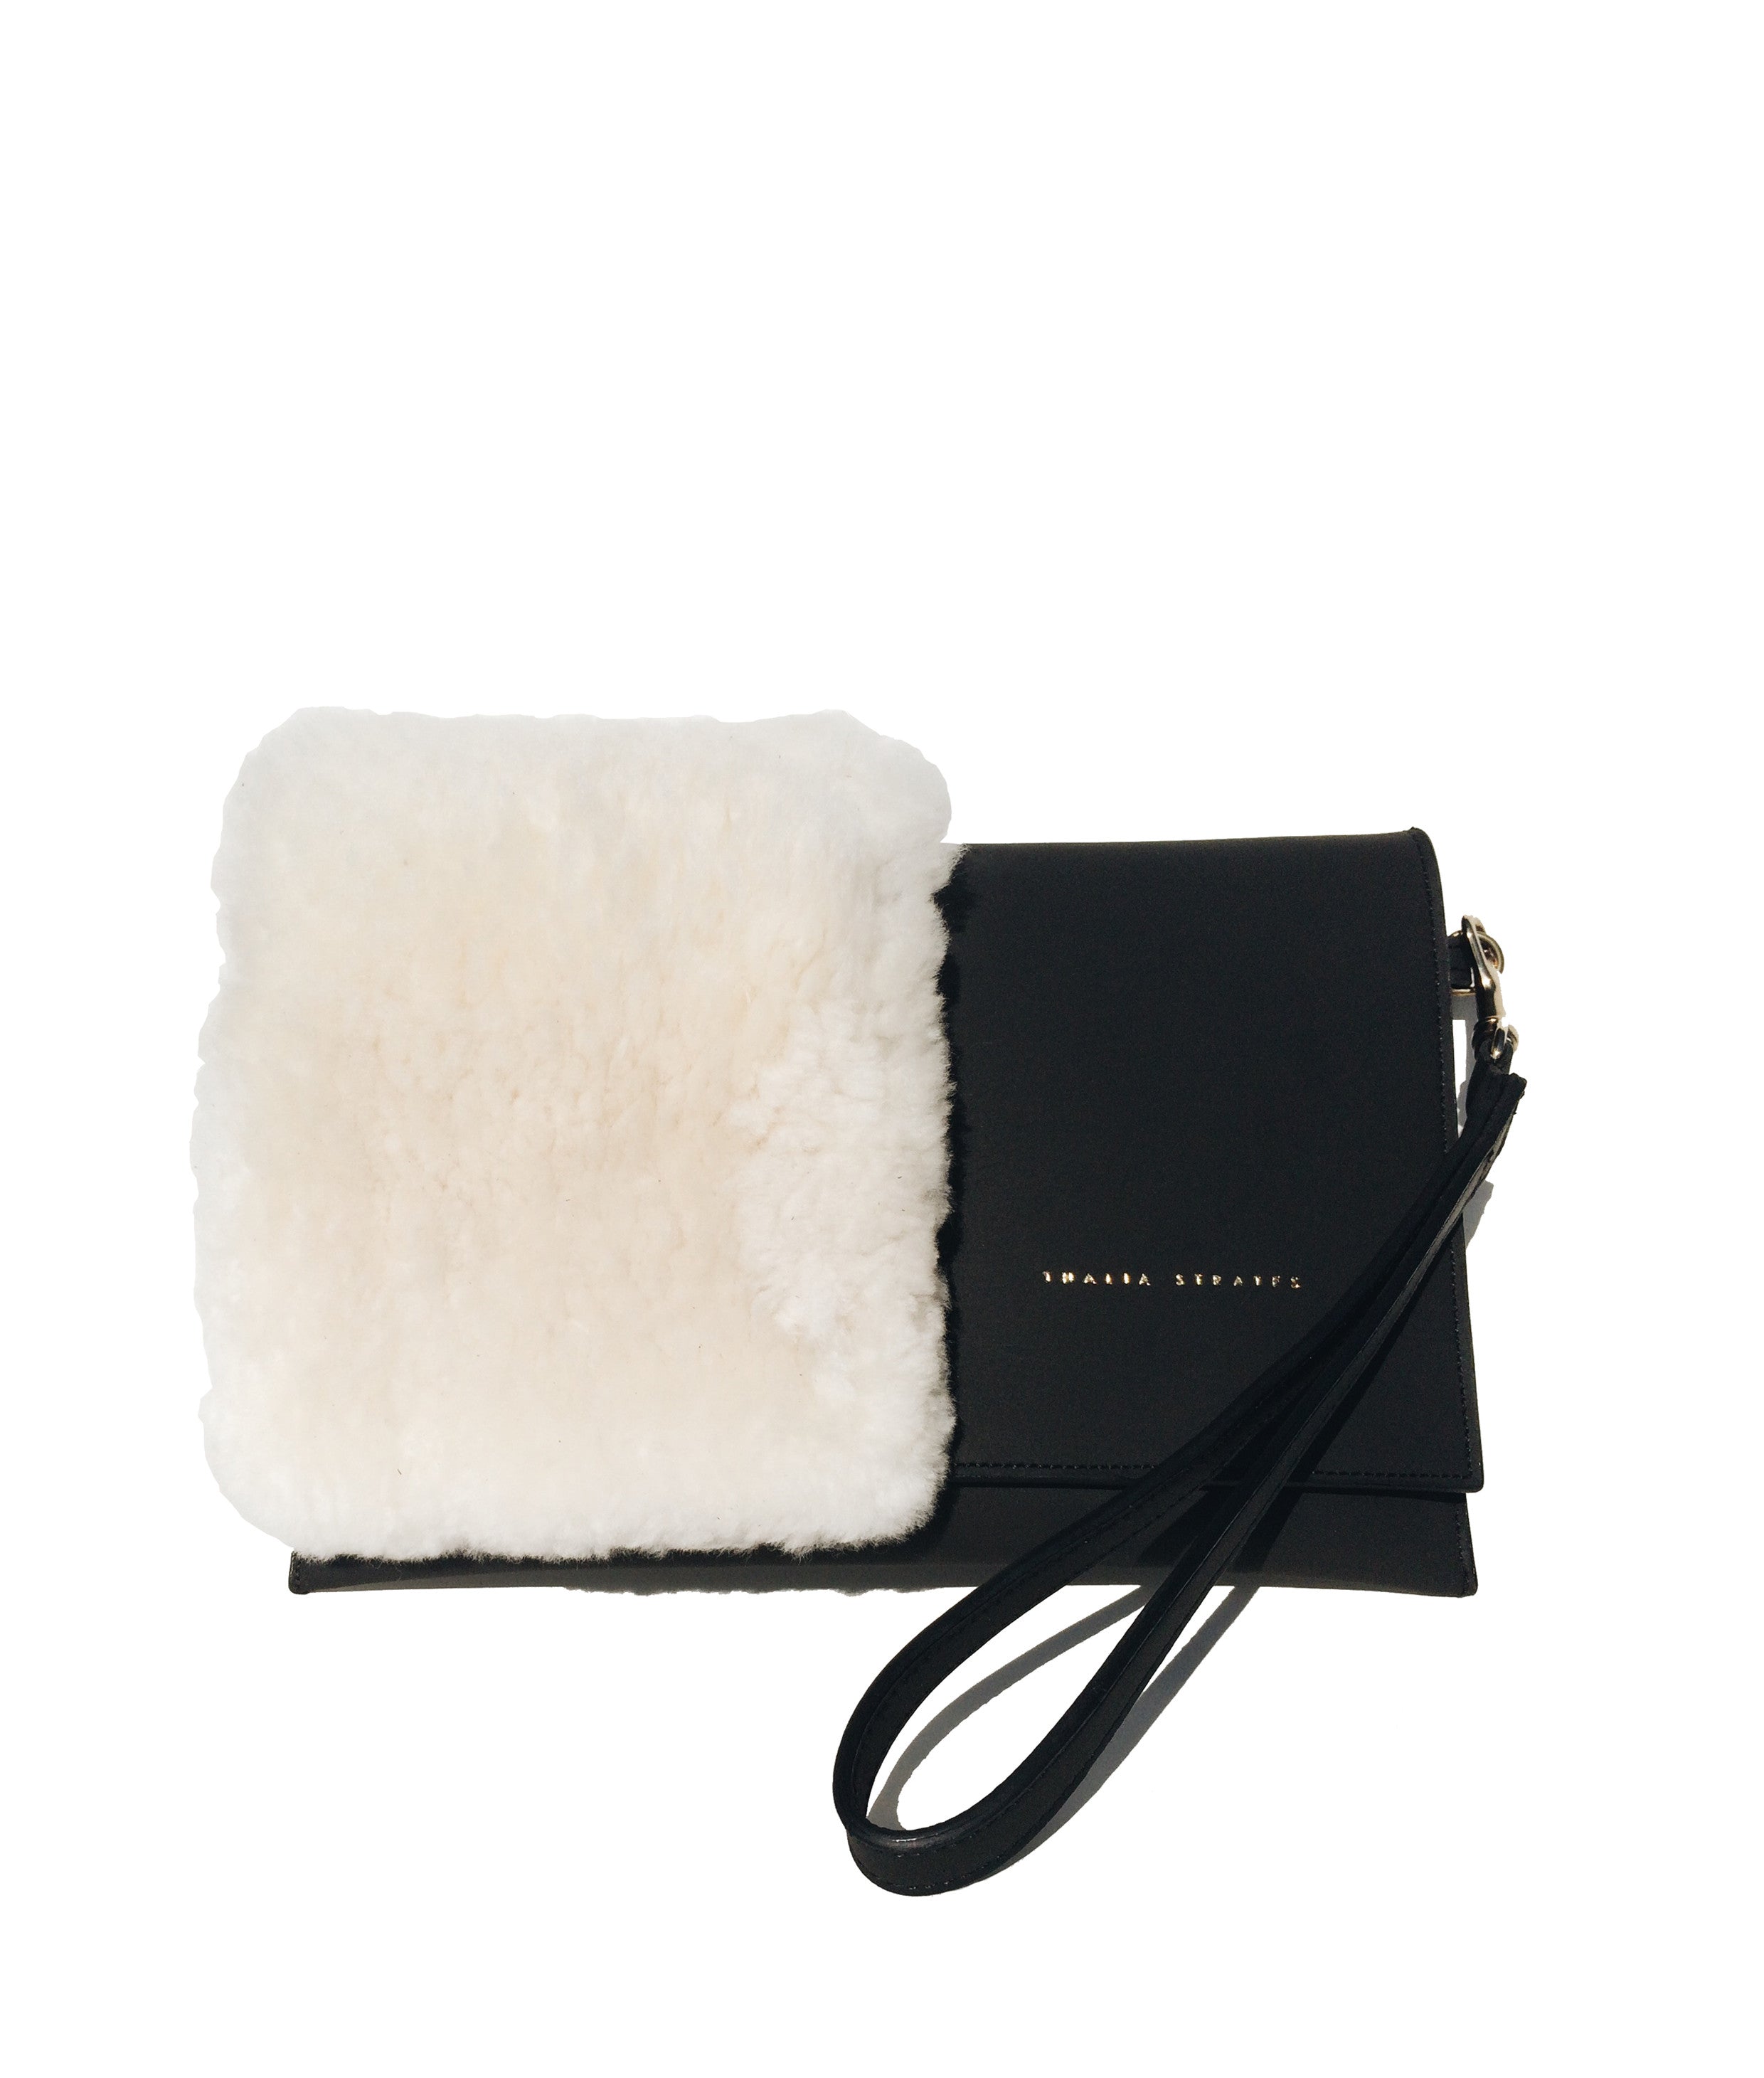 Mali leather bag with shearling details